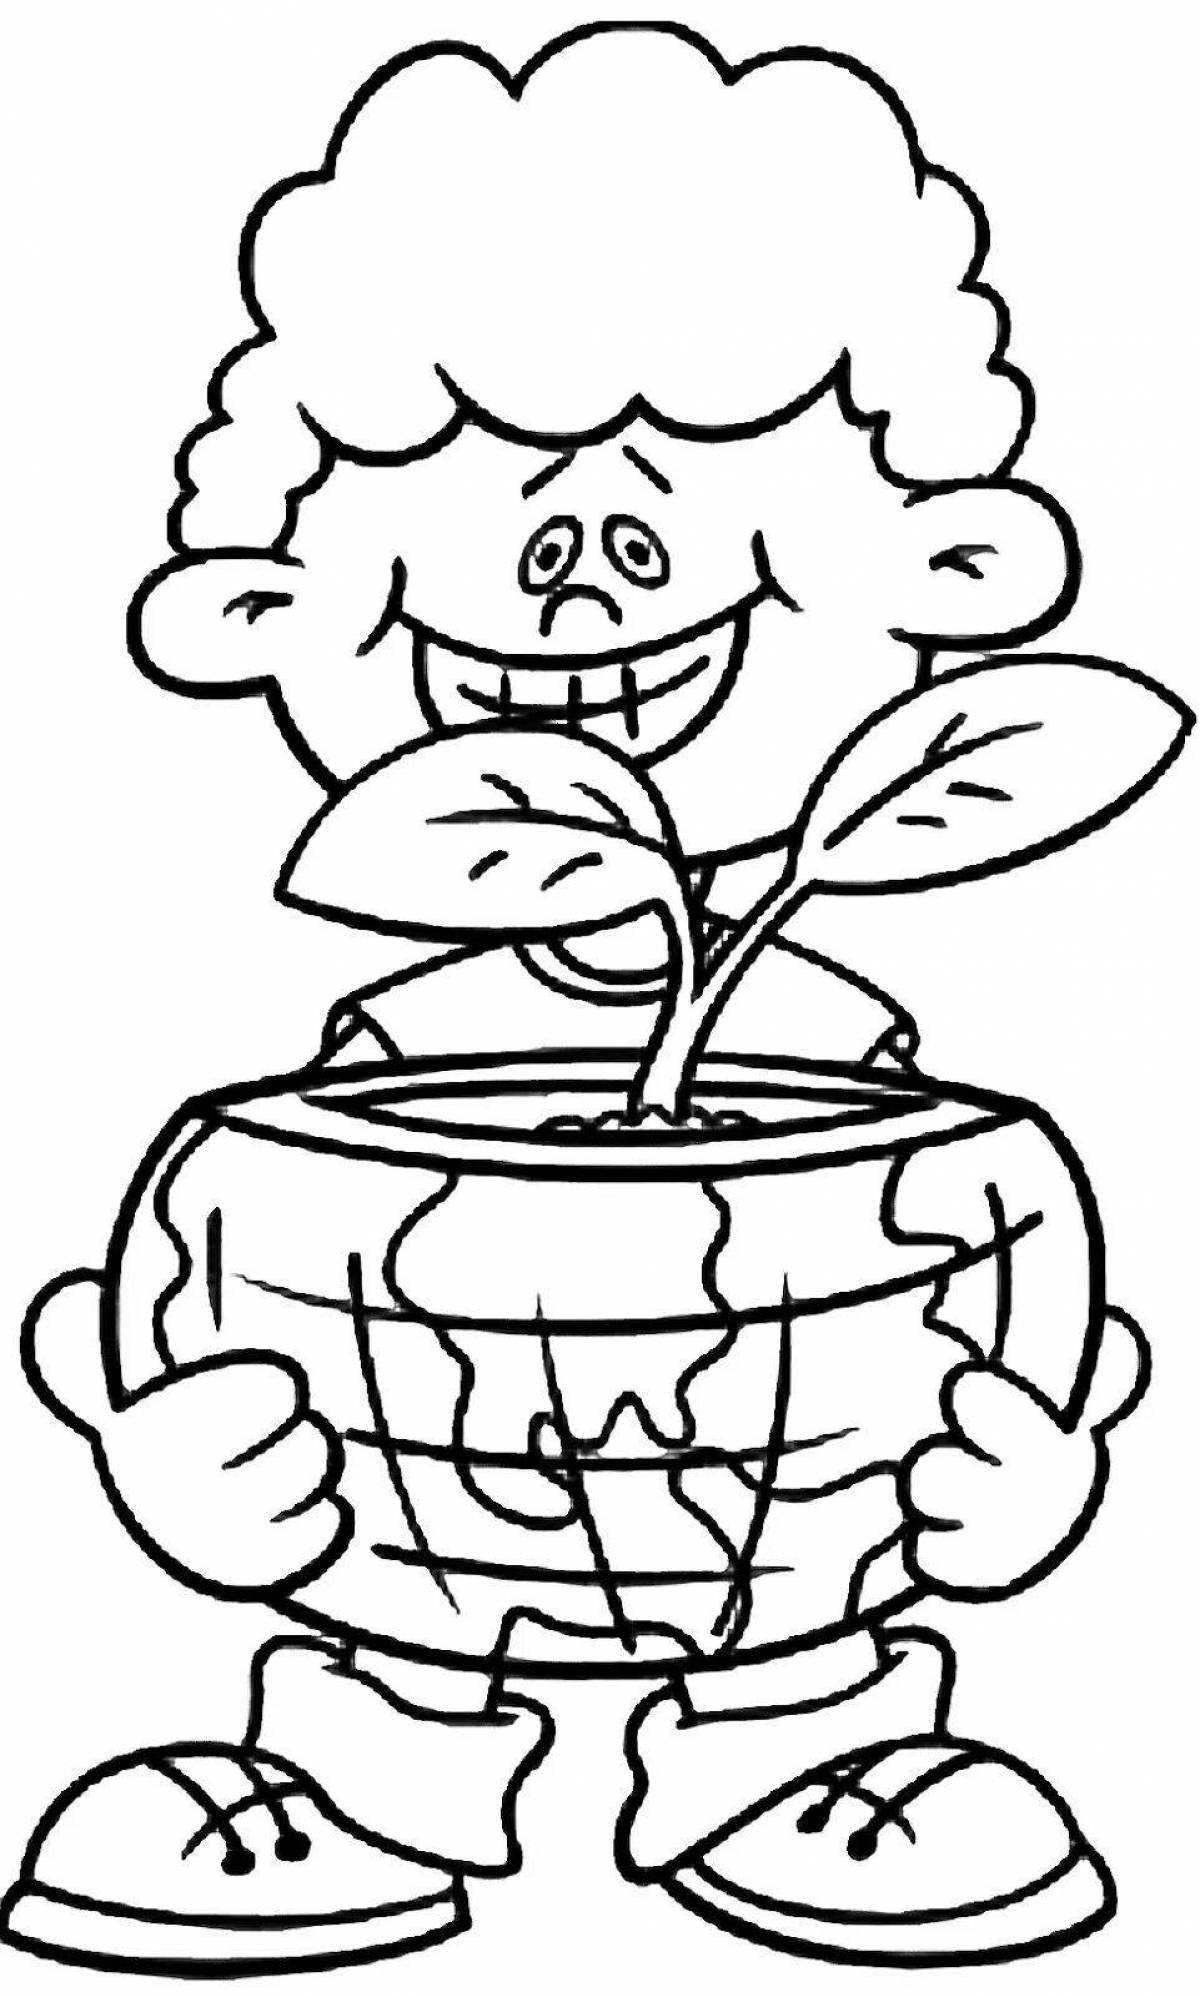 Adorable plant care coloring book